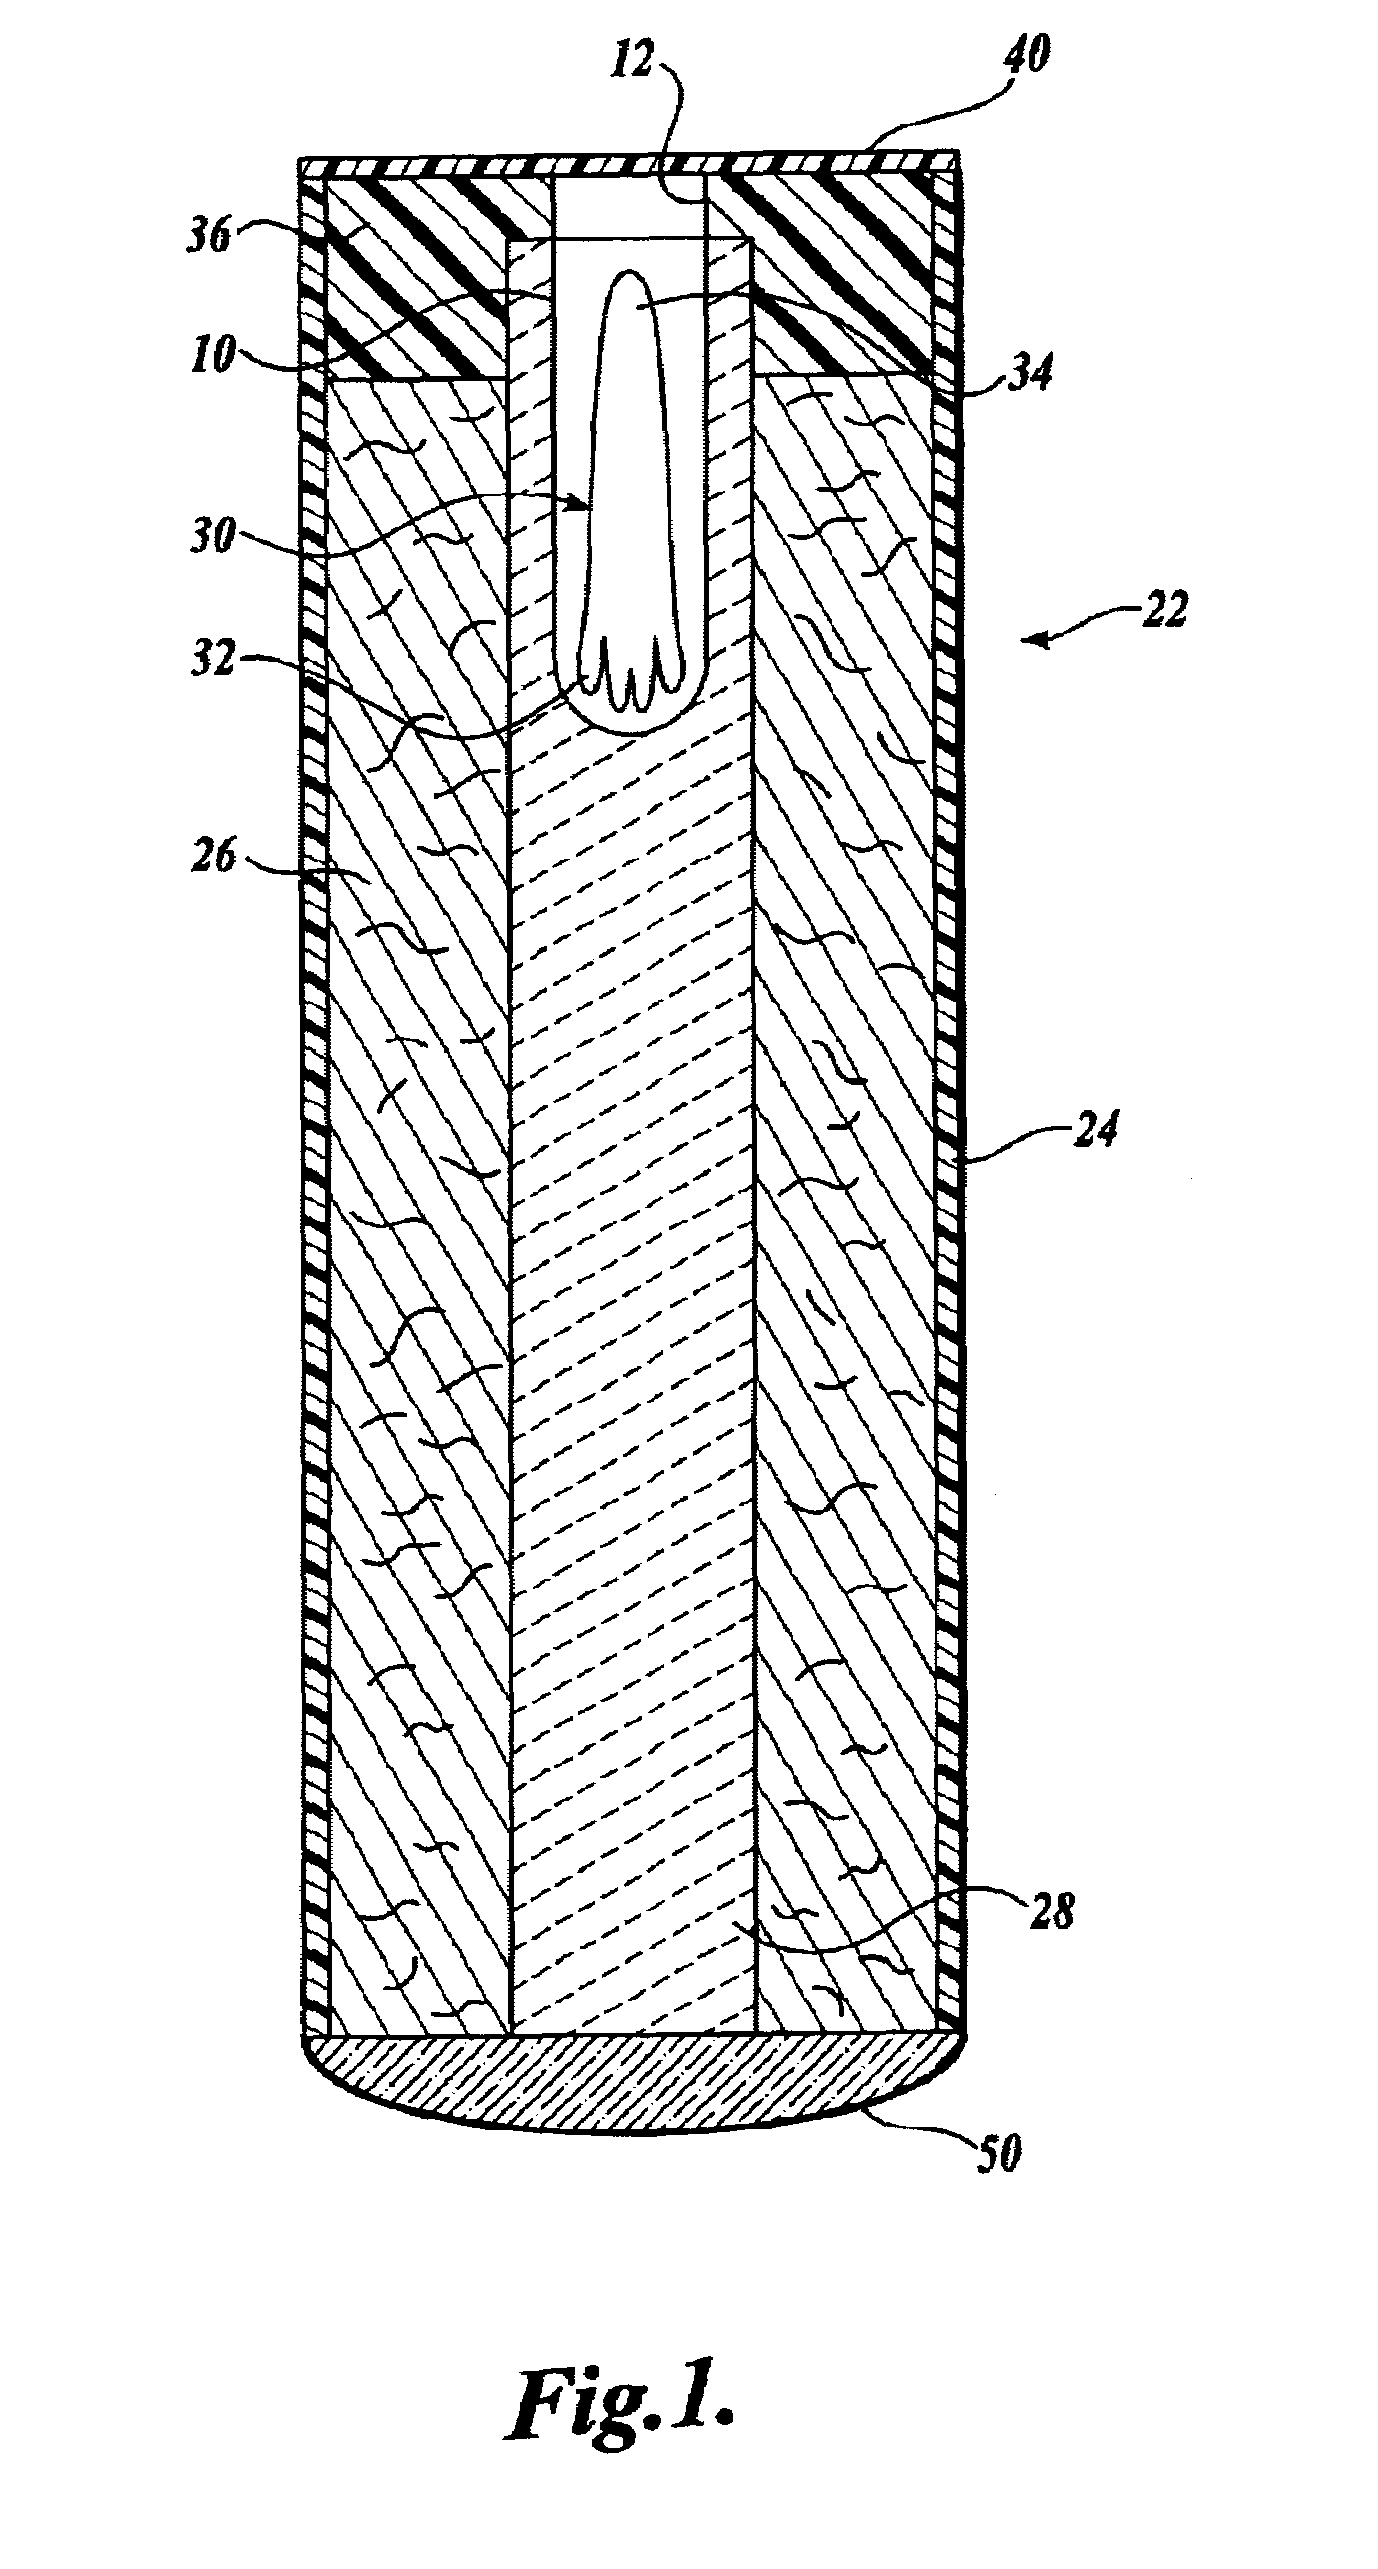 Method of attaching an end seal to manufactured seeds